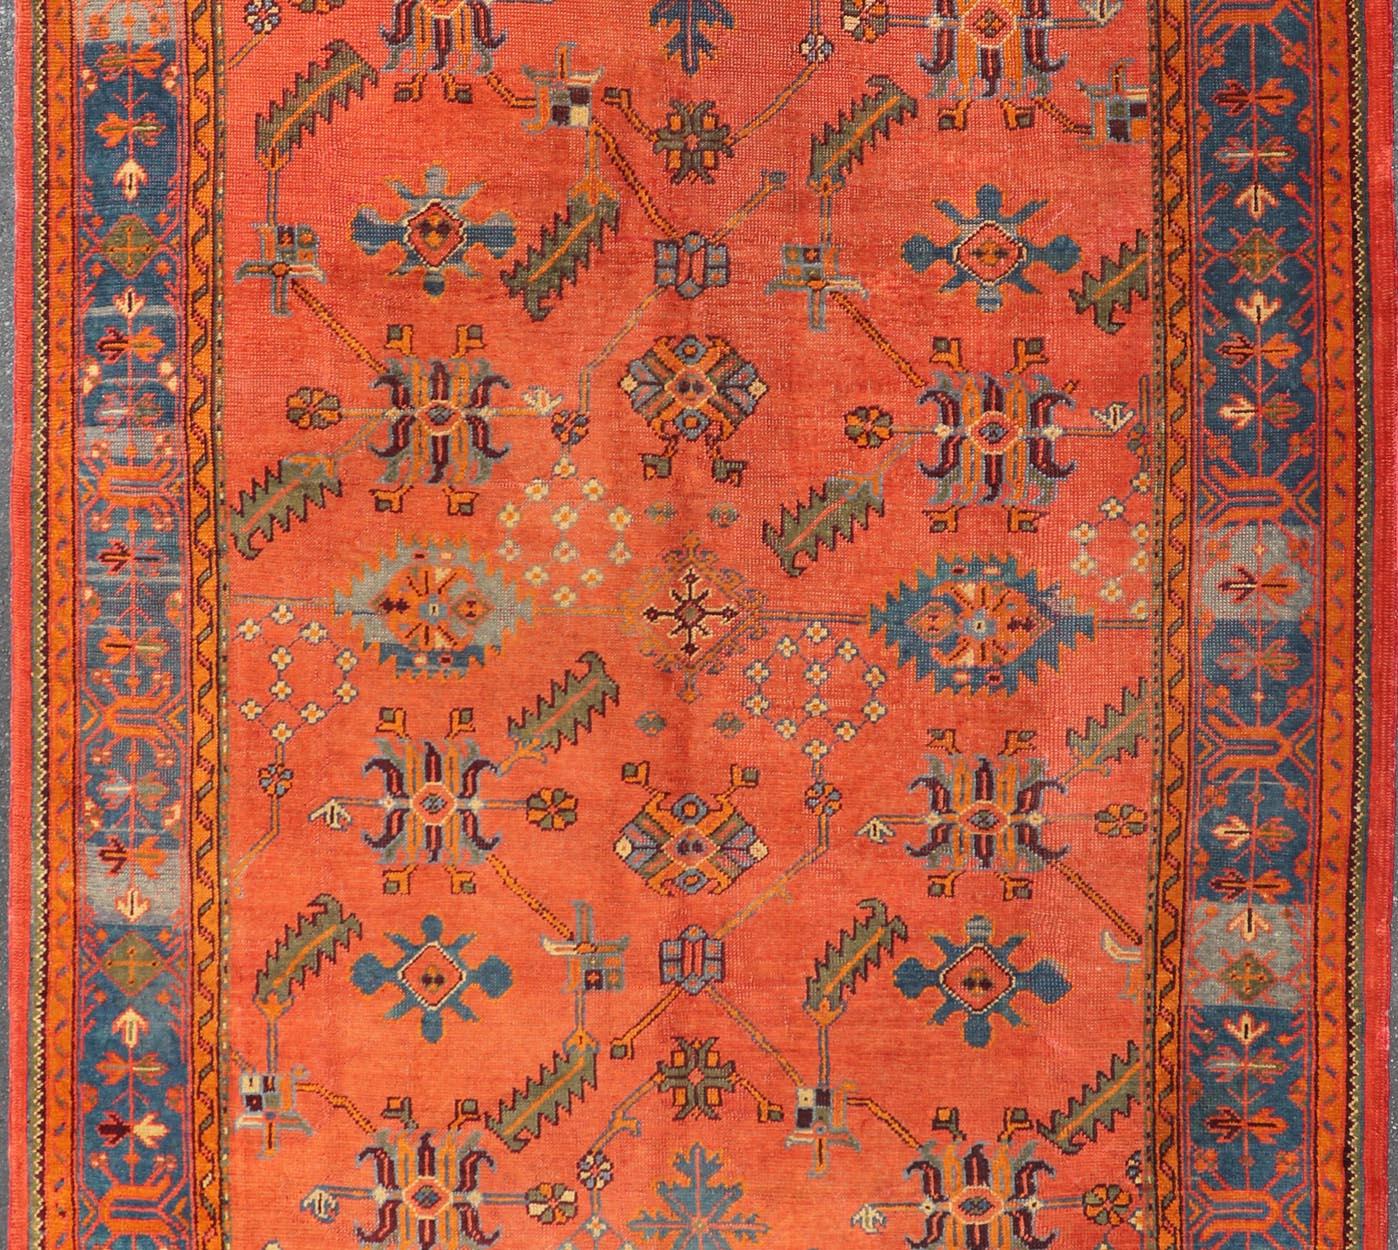 Antique Turkish Oushak Colorful Rug With All-Over Design In Salmon and Blue's  For Sale 5